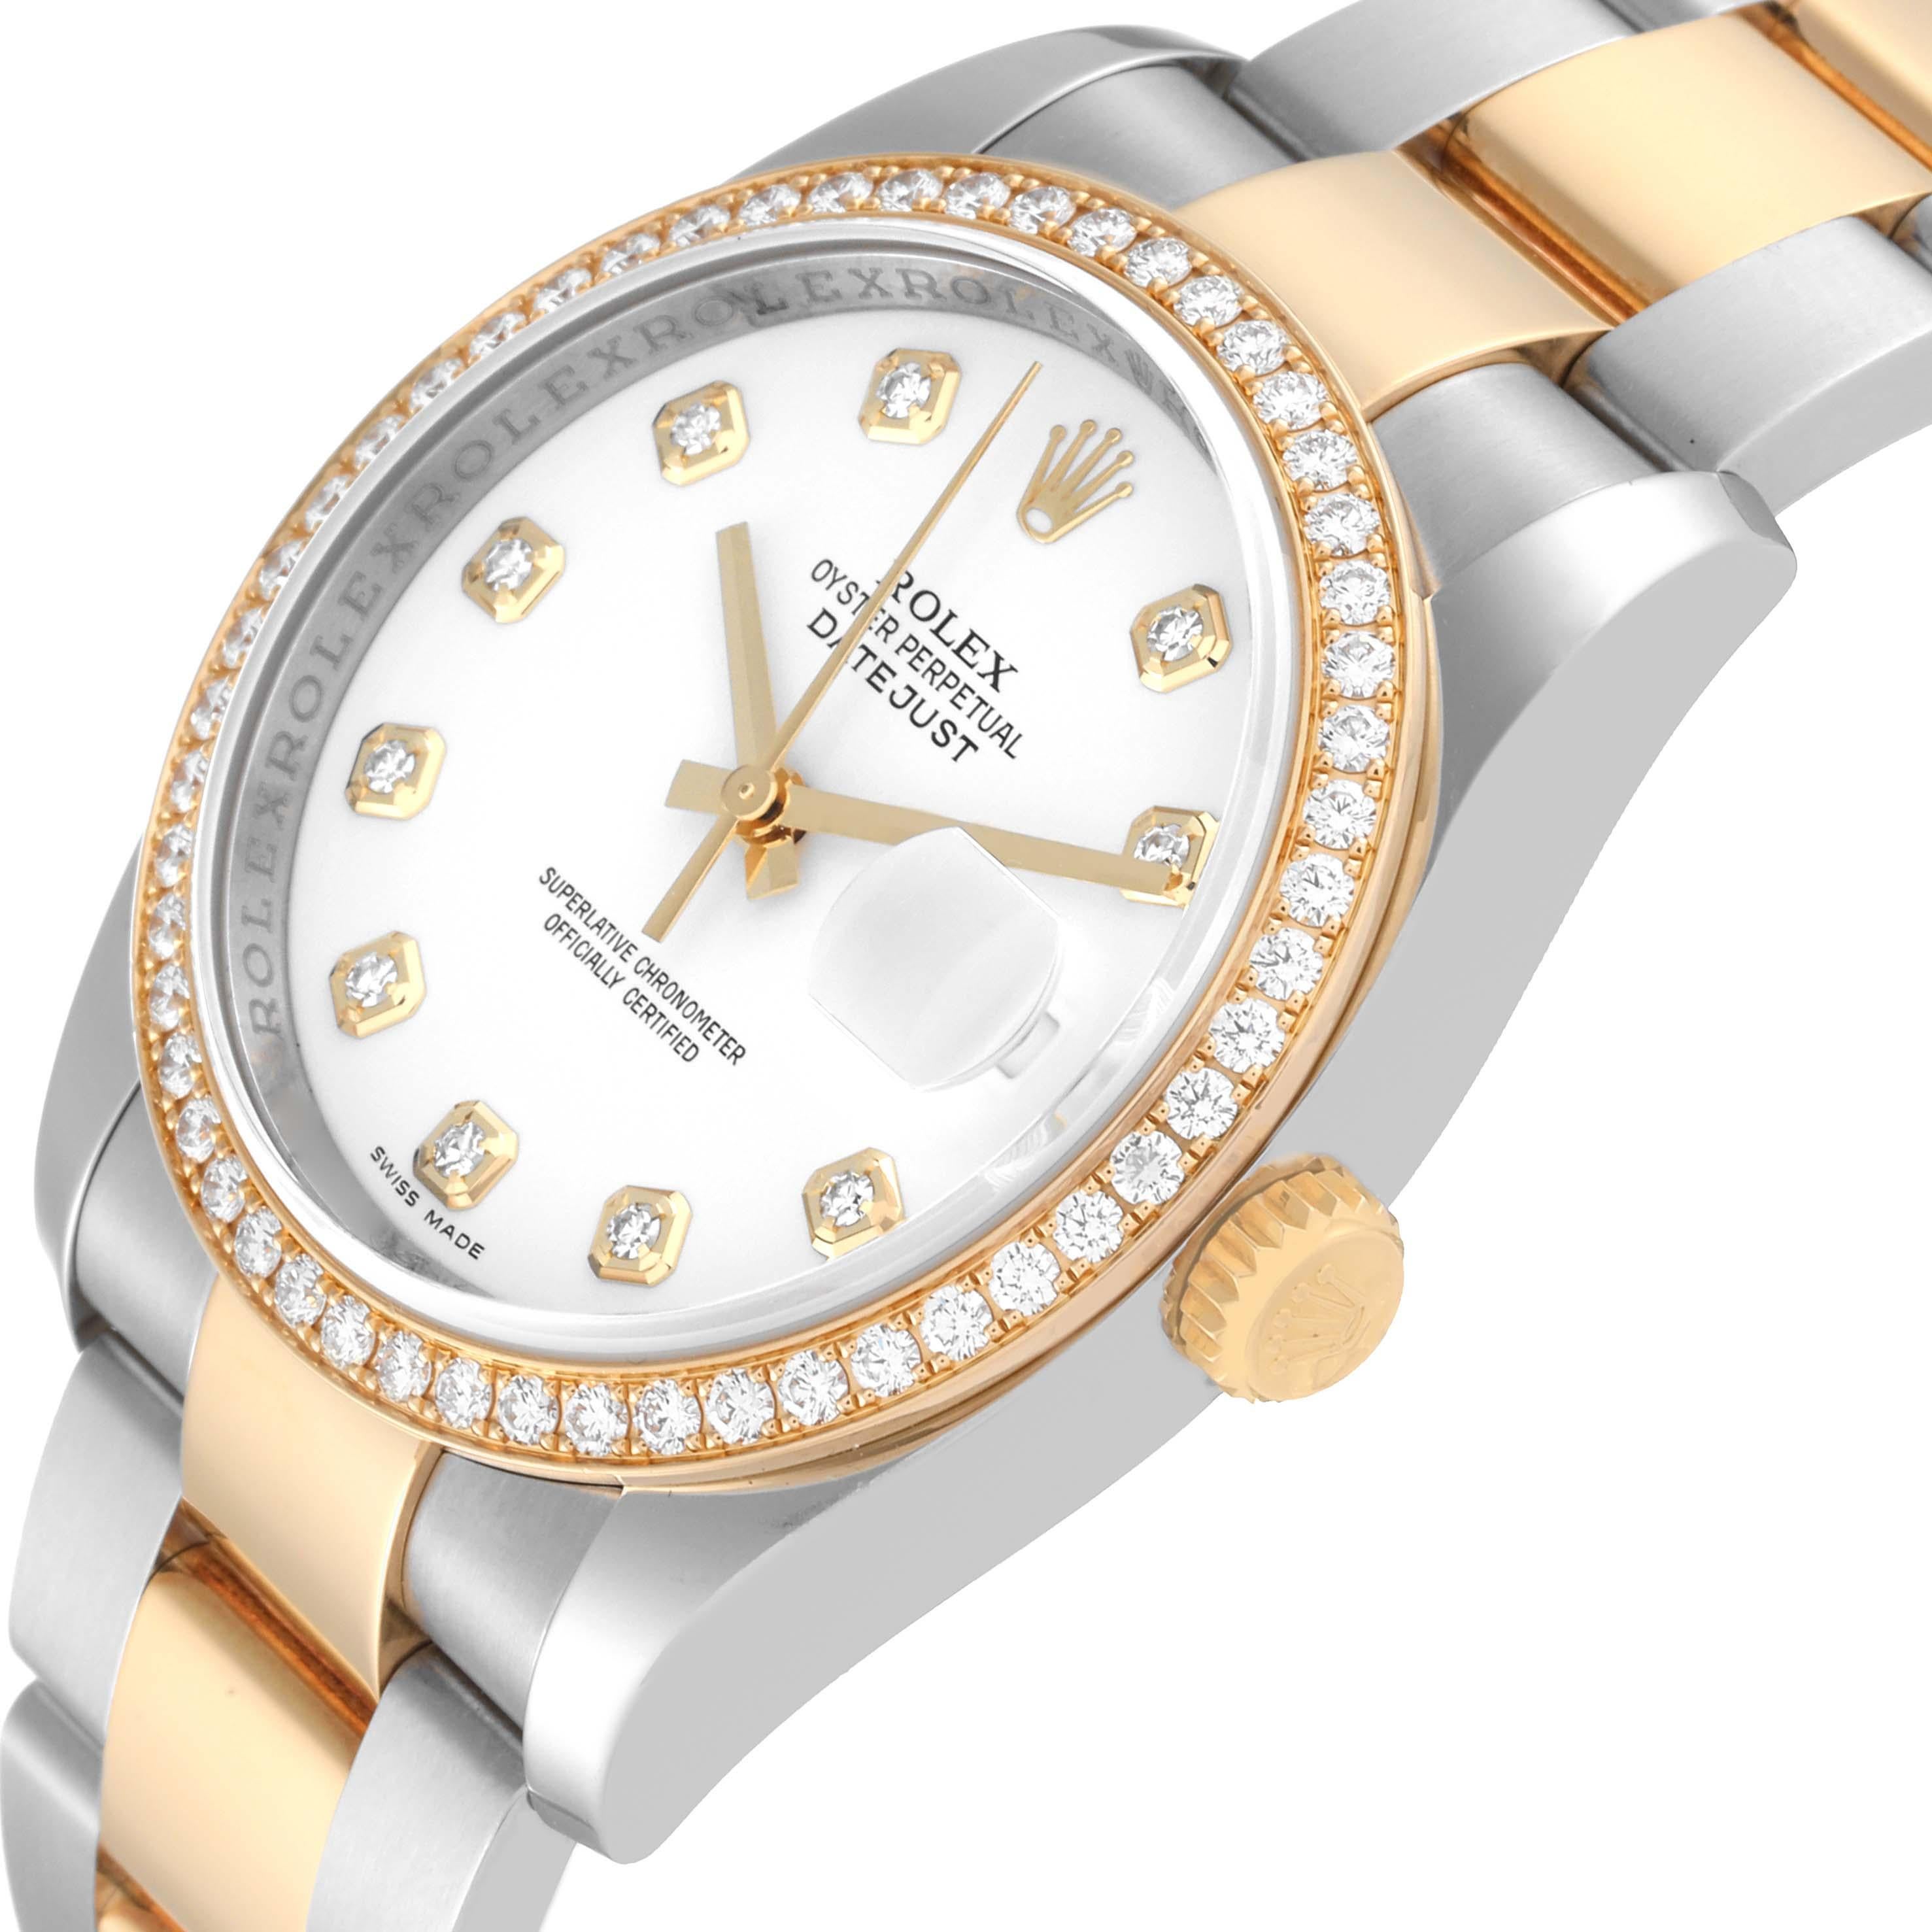 Rolex Datejust Steel Yellow Gold Diamond Mens Watch 116243 Box Card For Sale 8